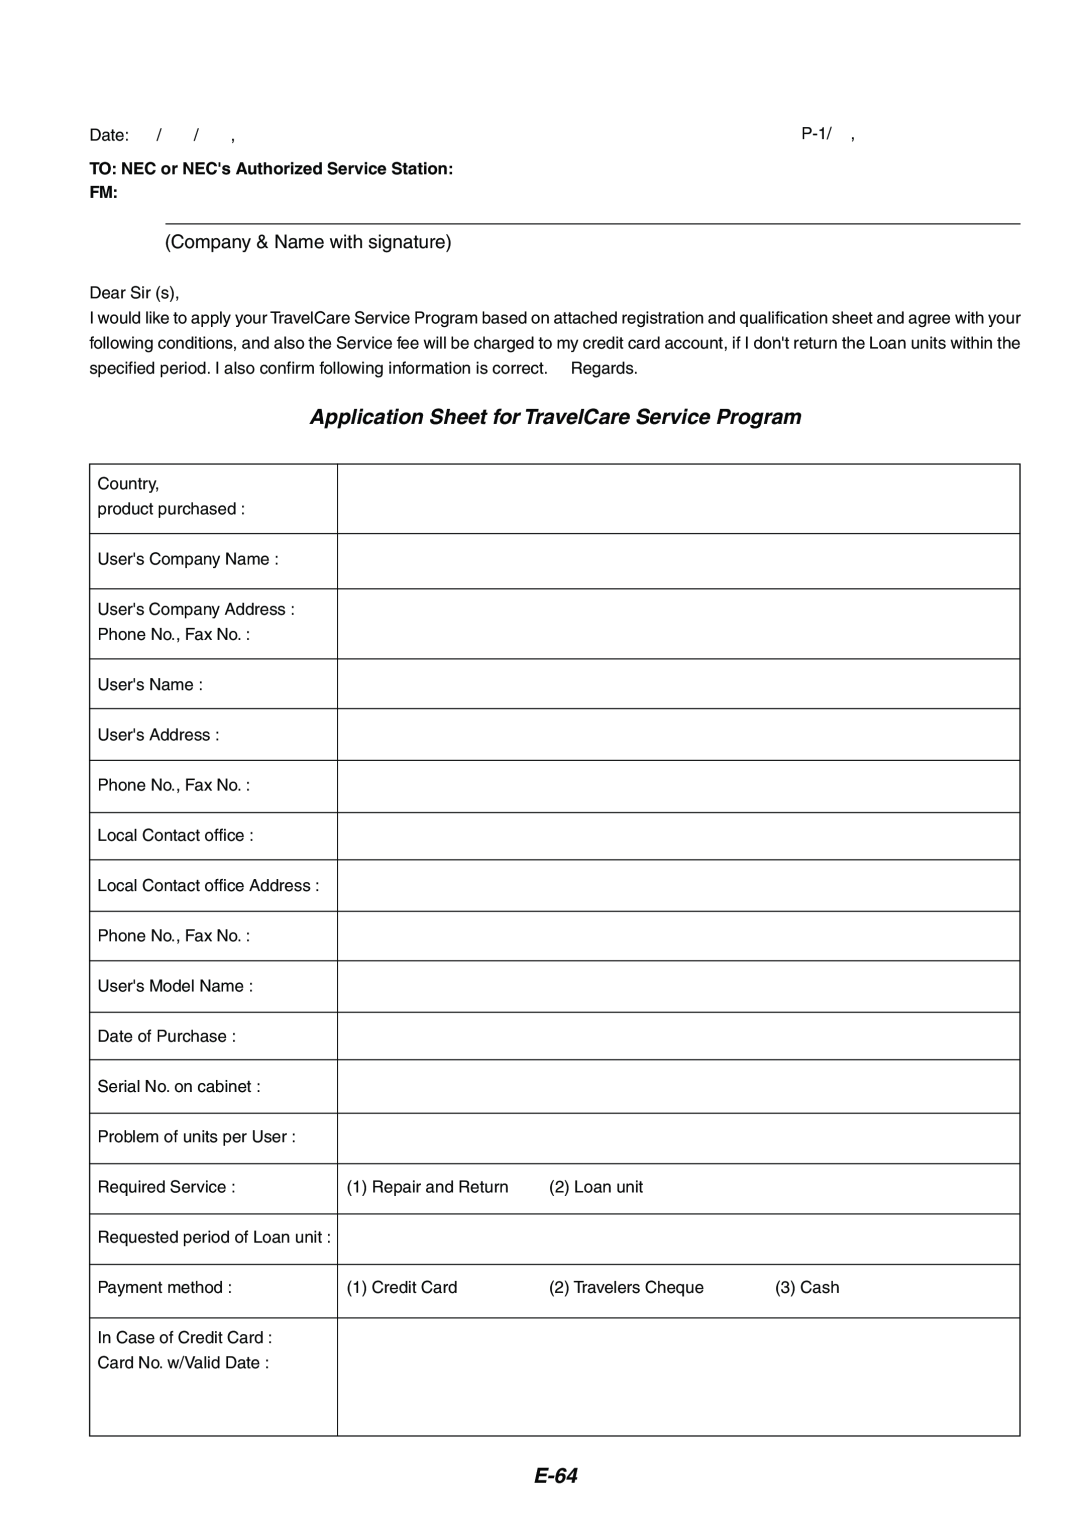 NEC MT1065/MT1060 user manual Application Sheet for TravelCare Service Program, E-64, Company & Name with signature 